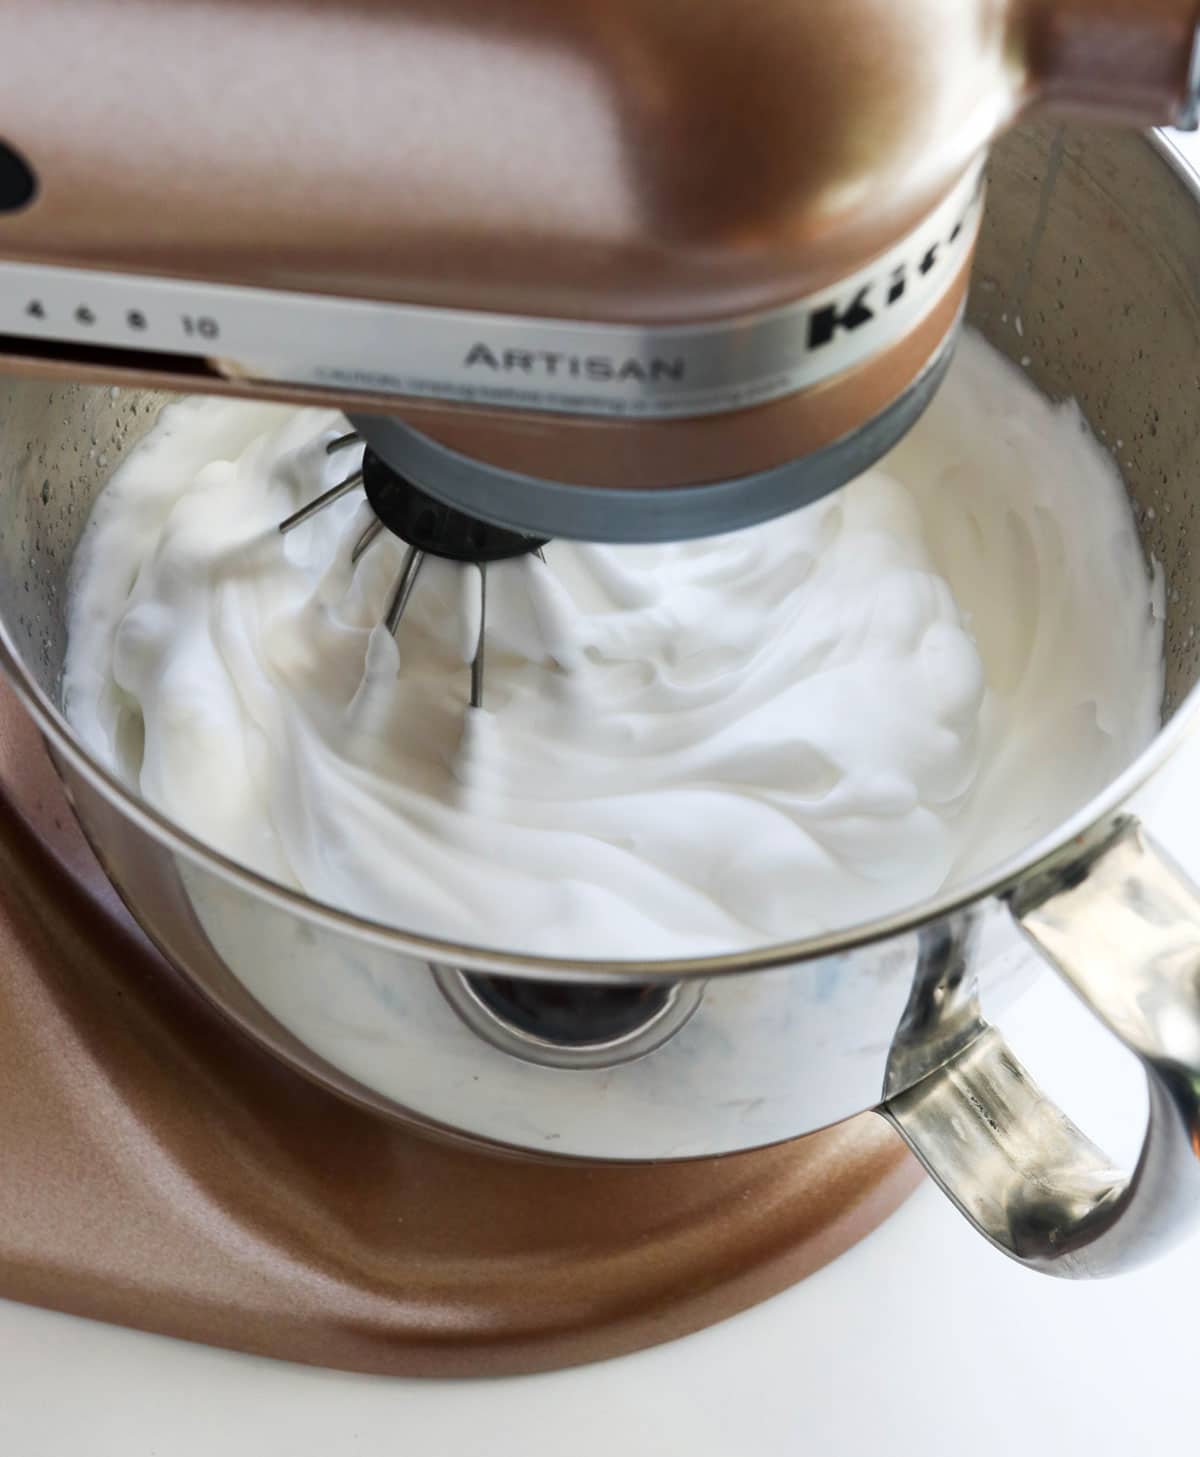 whipped aquafaba in stand mixer